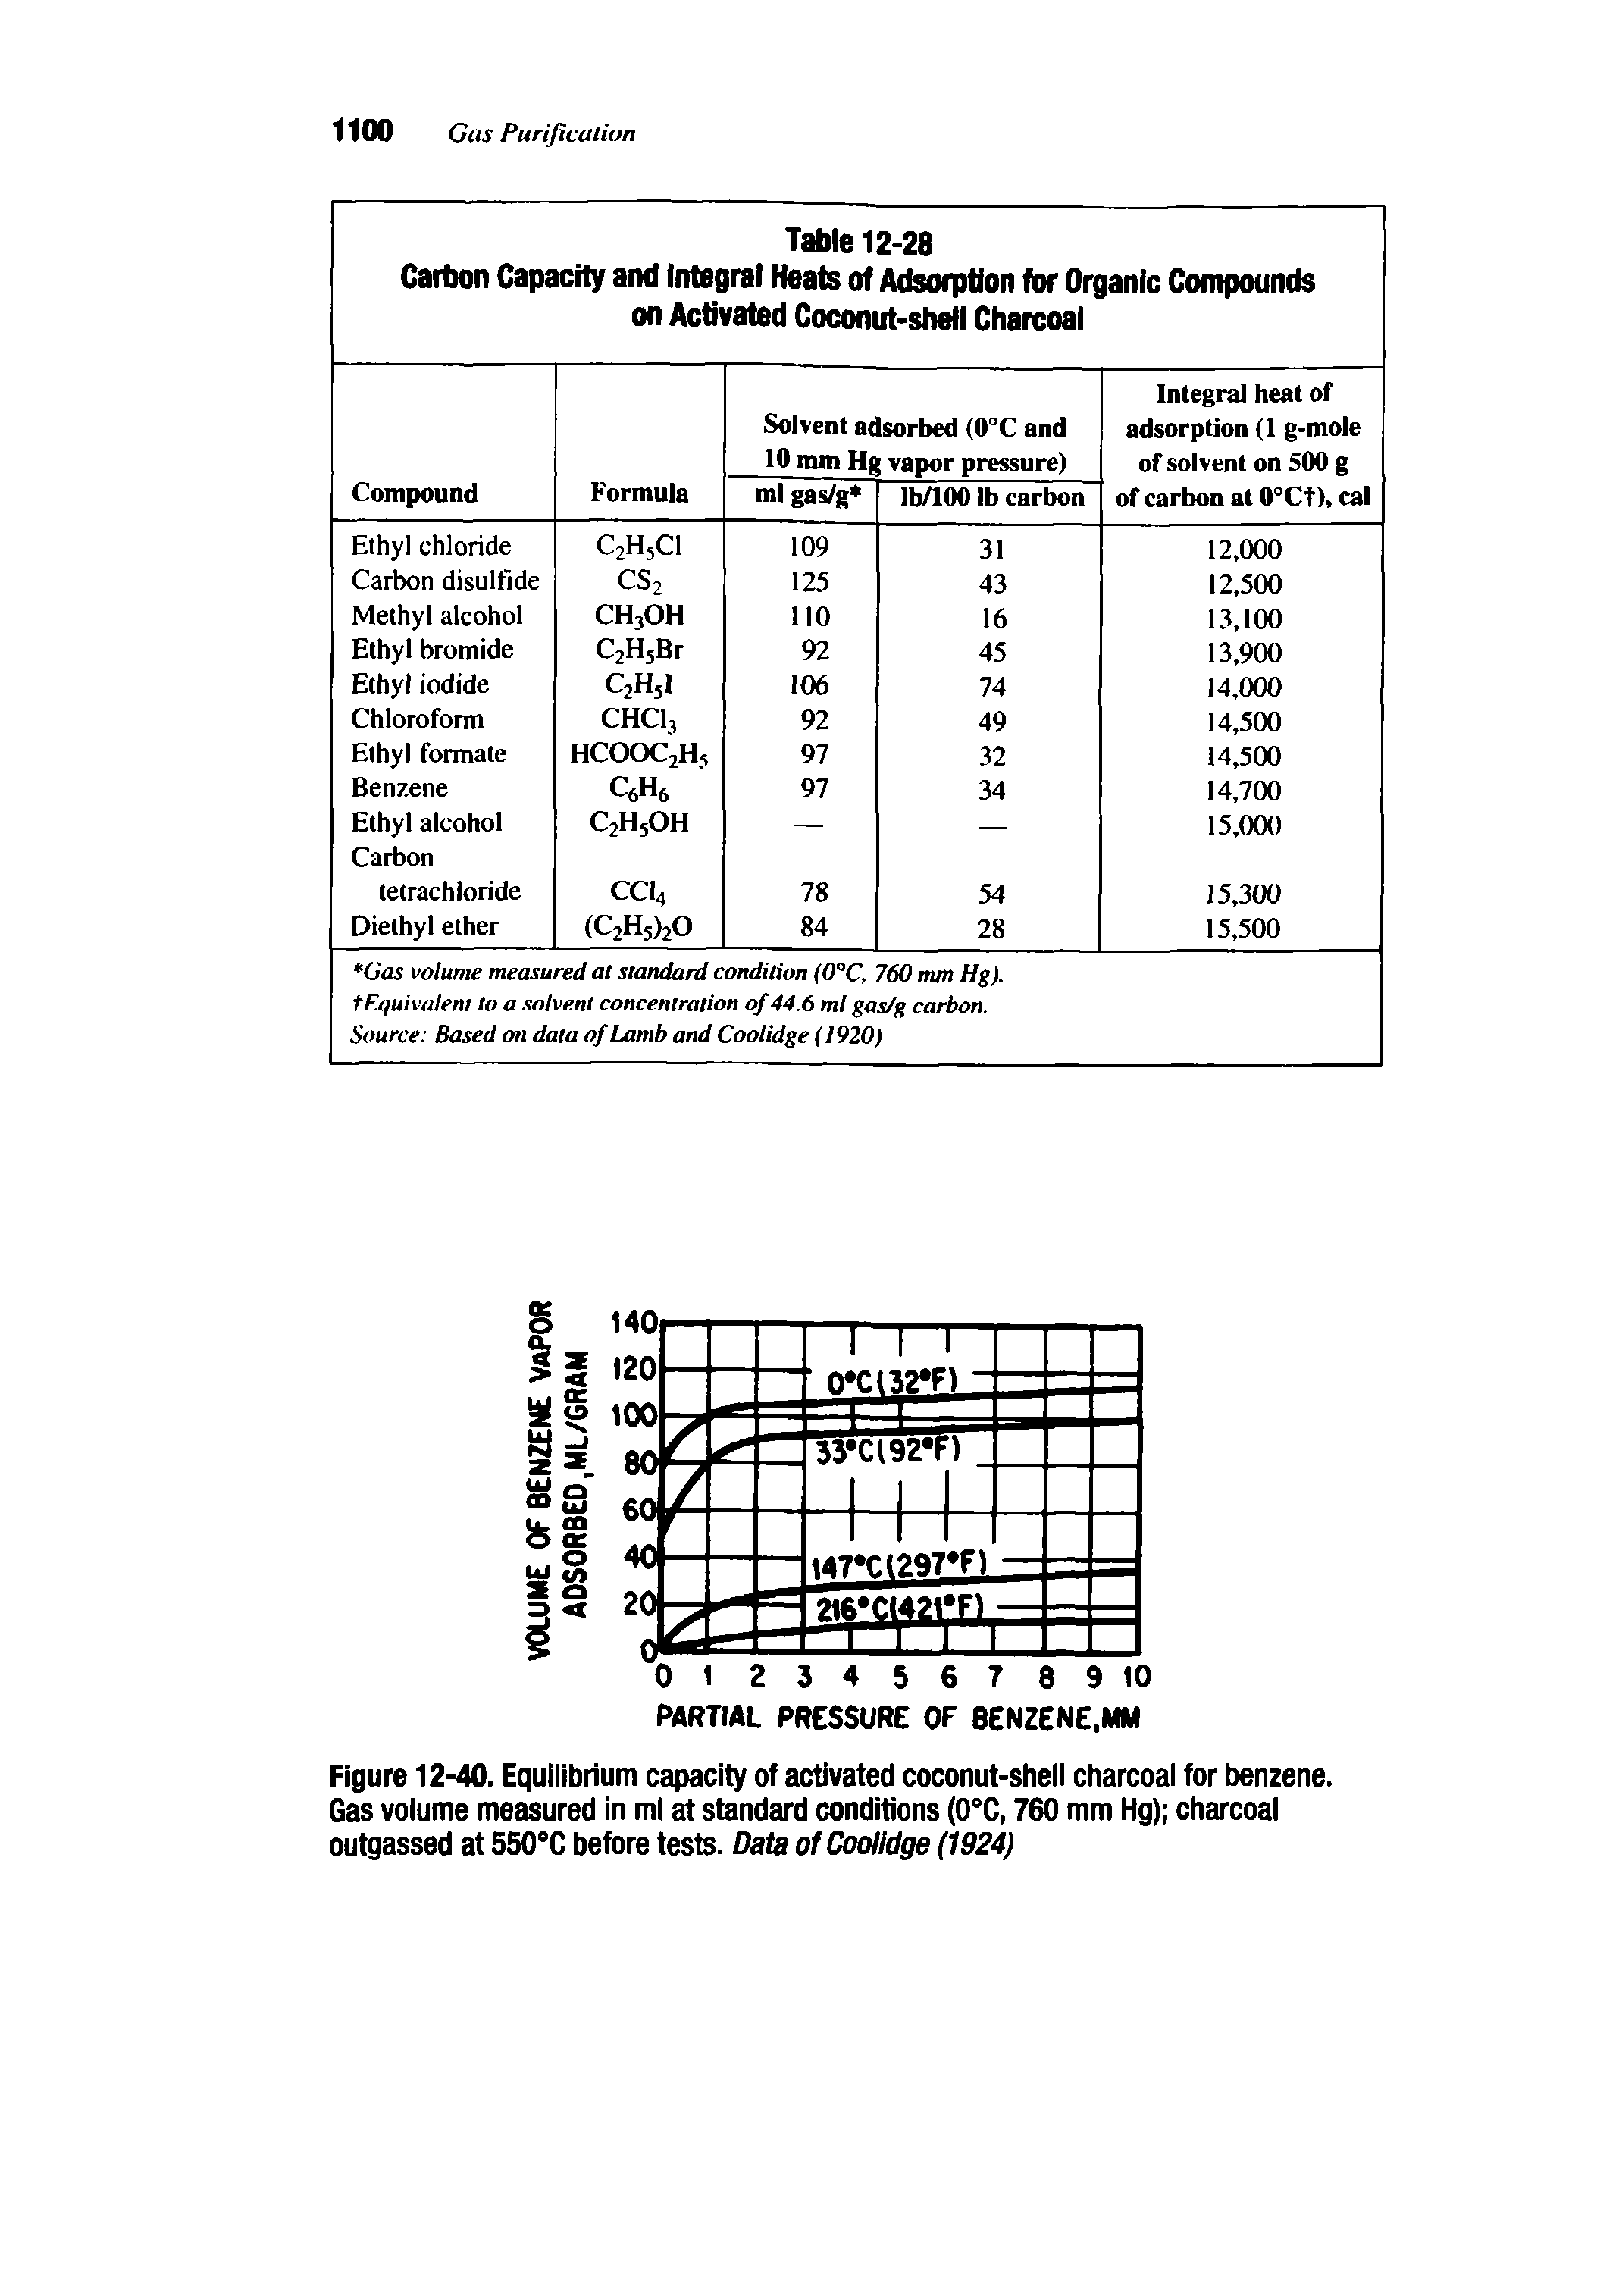 Figure 12-40. Equilibrium capacity of activated coconut-shell charcoal for benzene. Gas volume measured in ml at standard conditions (0°C, 760 mm Hg) charcoal outgassed at 550 C before tests. Data of Coolidge (1924)...